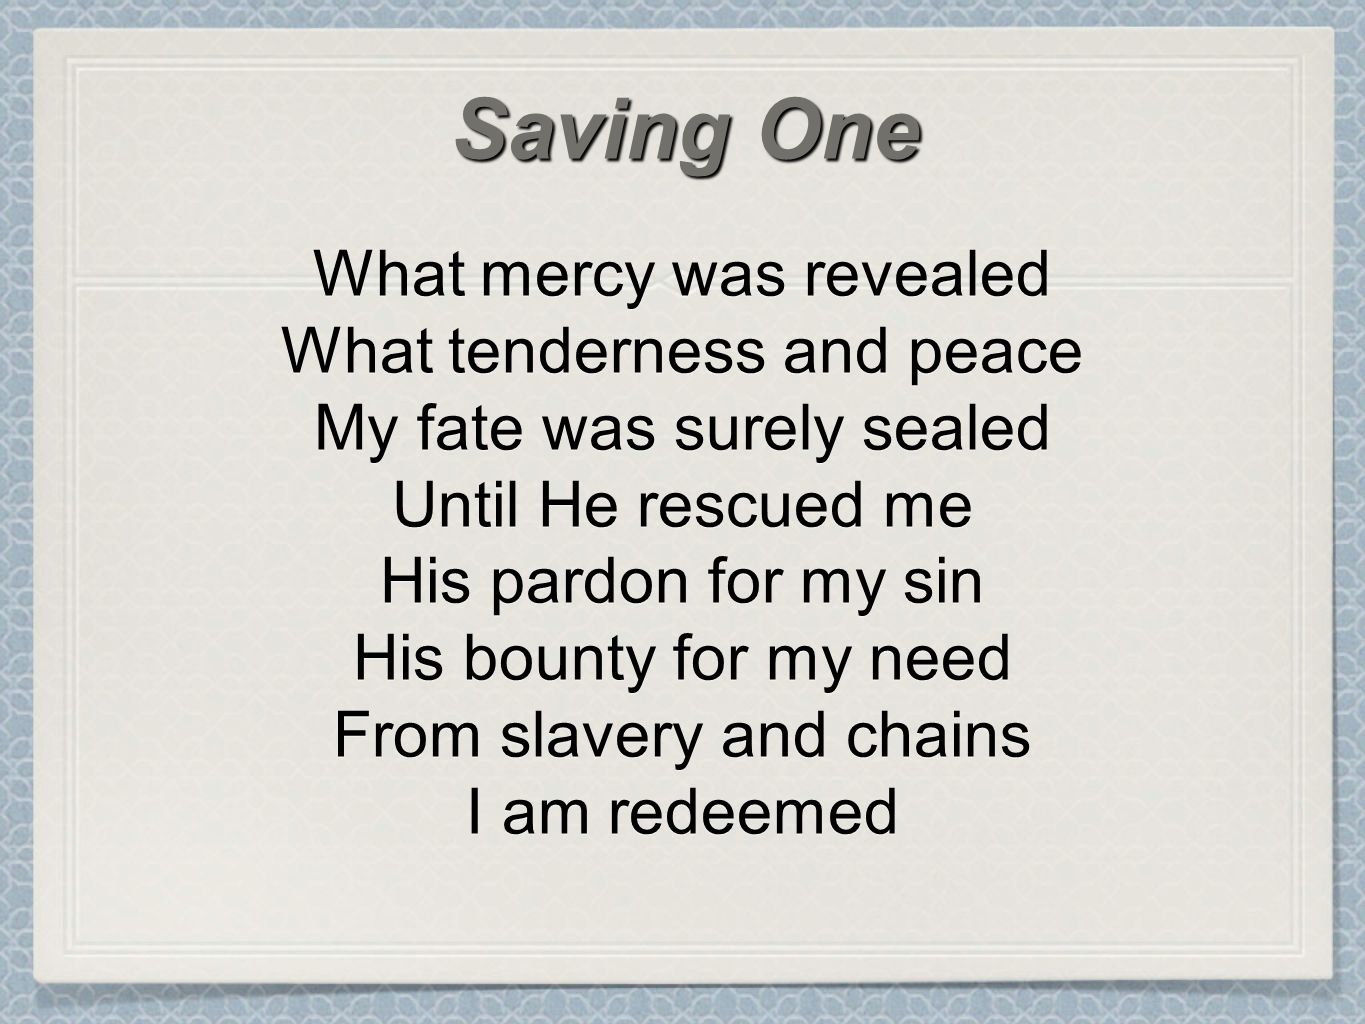 What mercy was revealed What tenderness and peace My fate was surely sealed Until He rescued me His pardon for my sin His bounty for my need From slavery and chains I am redeemed Saving One